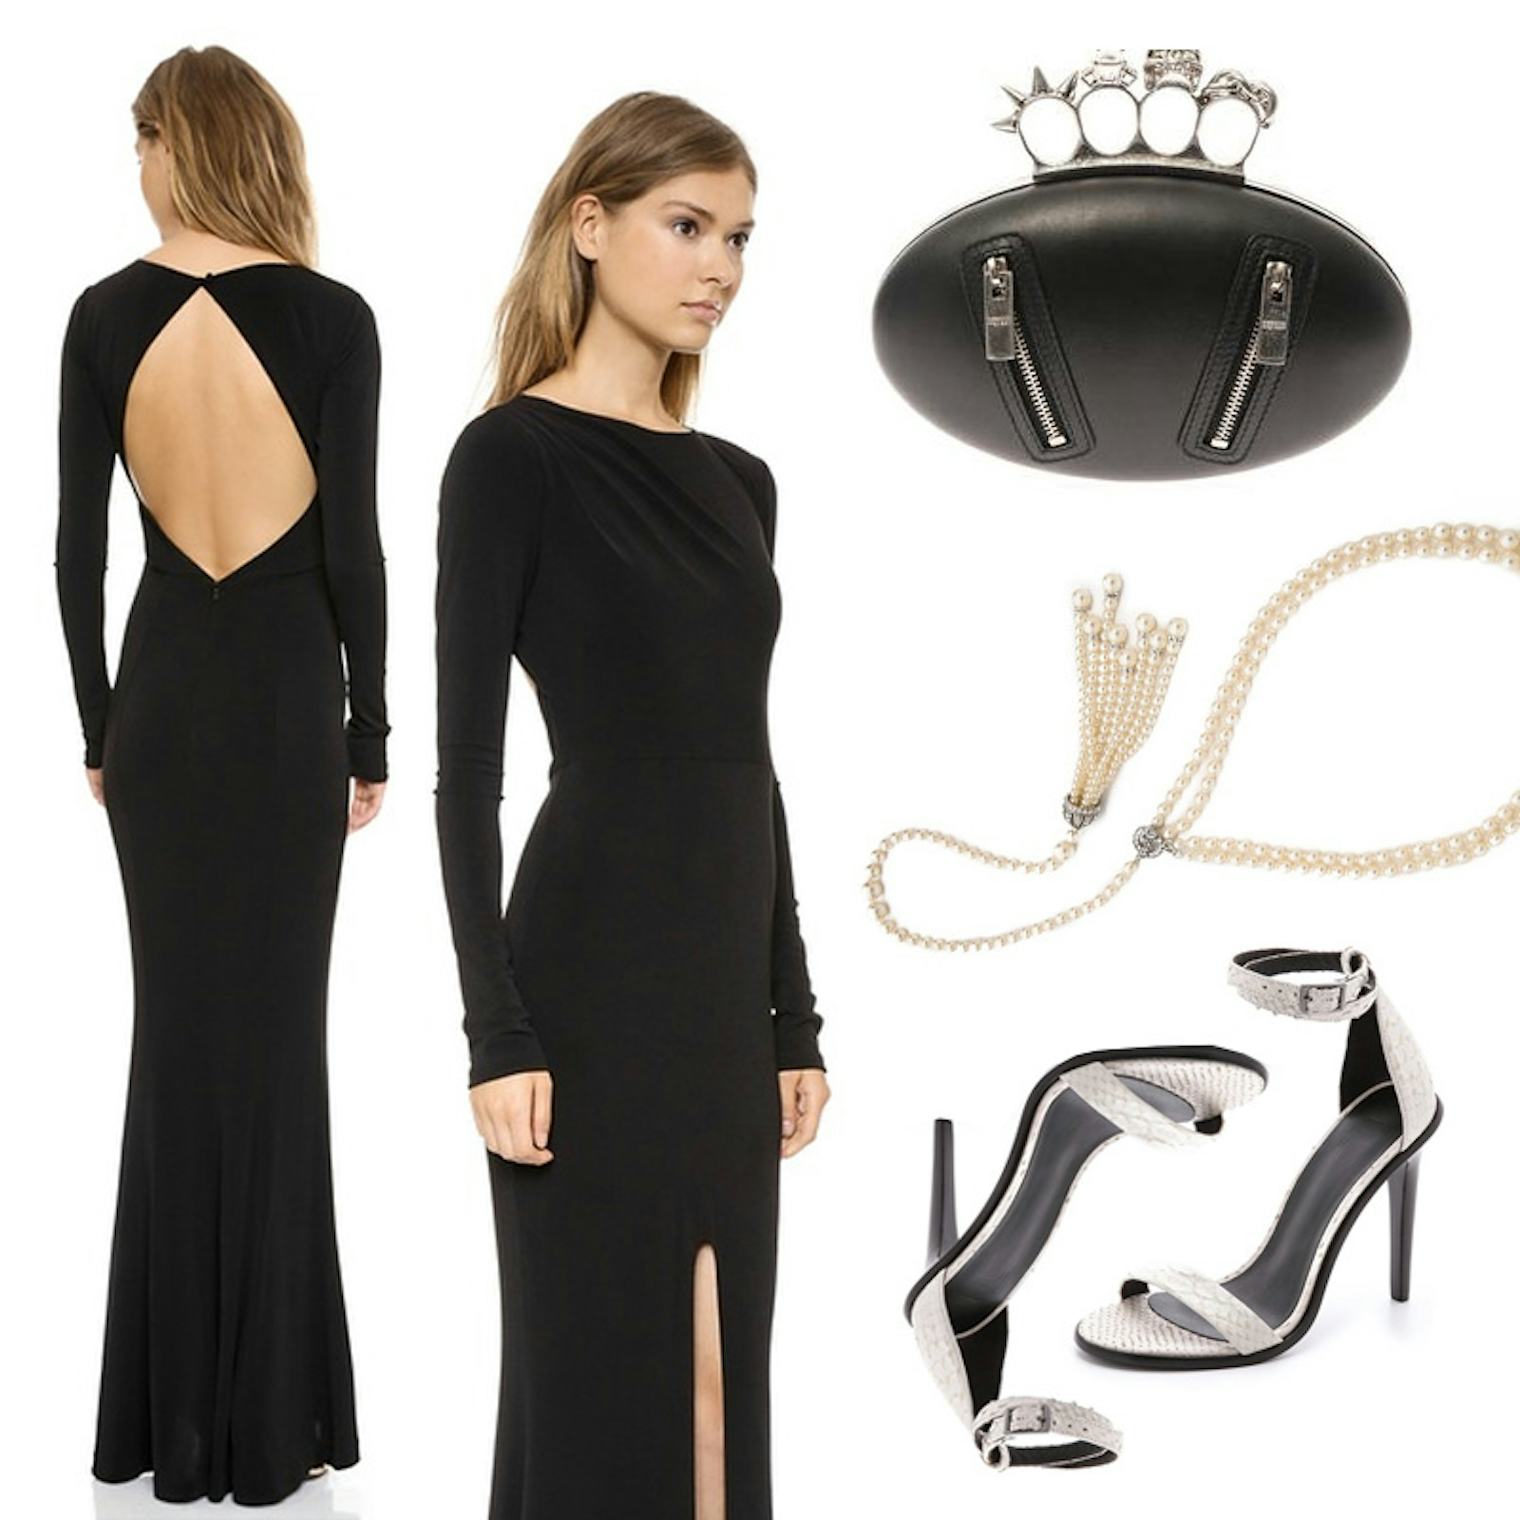 What To Wear To A Black Tie Event